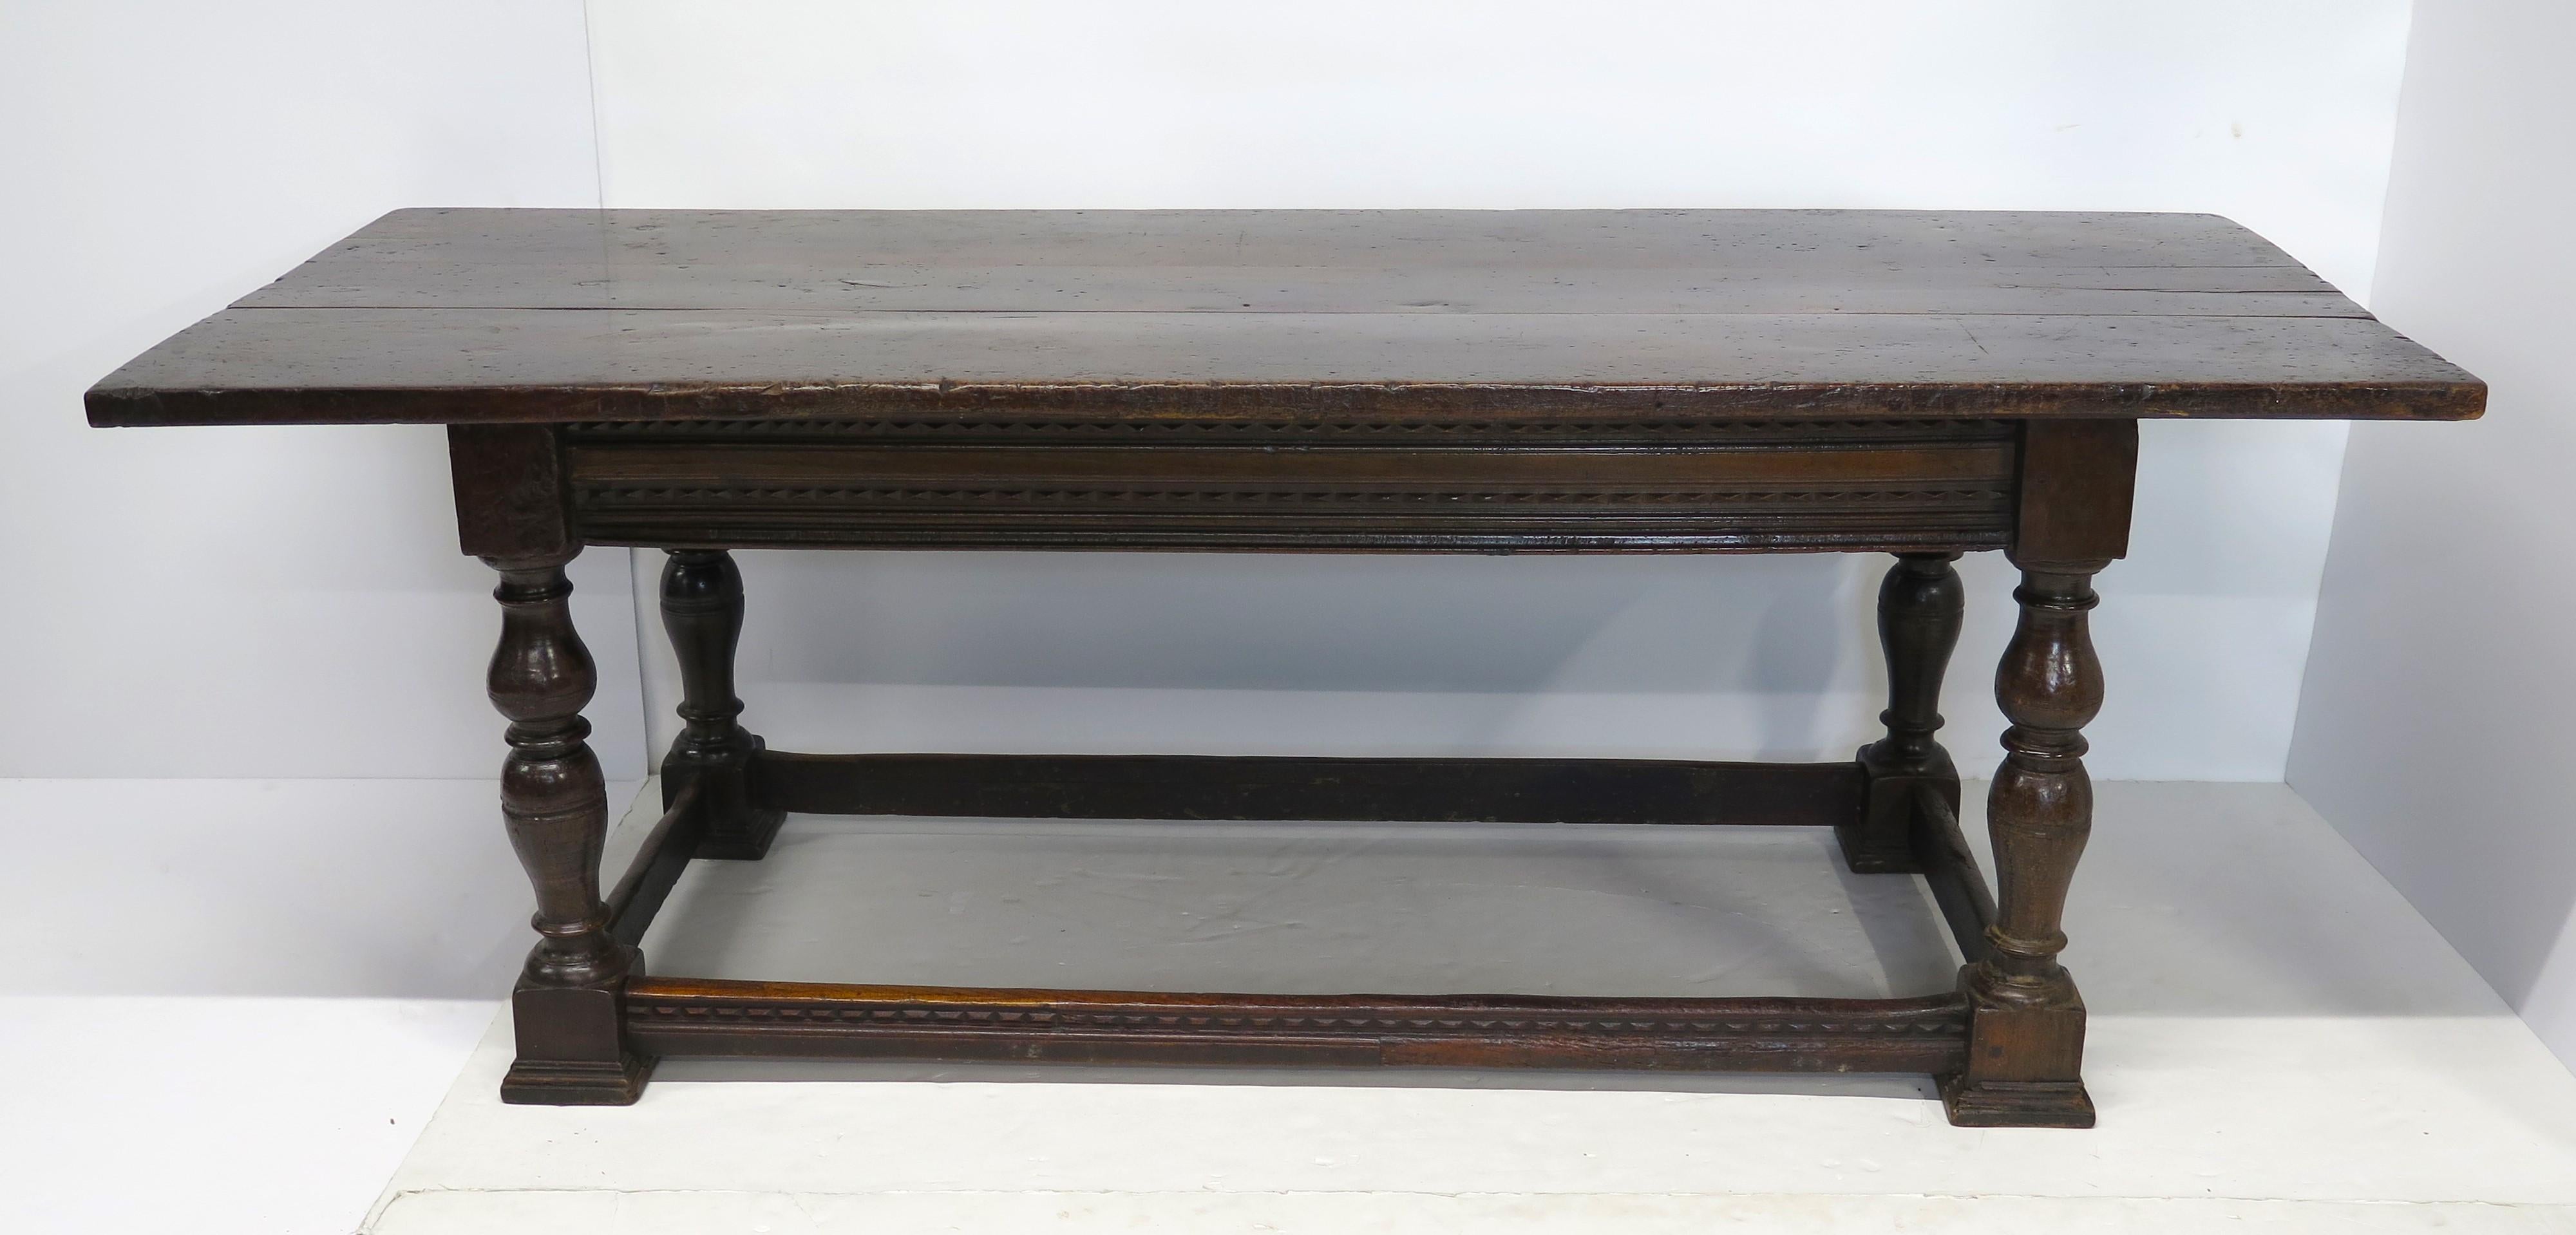 a heavy oak refectory table with stretcher base, it has a triple plank top, turned baluster legs support the apron of the table, these sorts of tables were used as communal dining tables, together with benches or stools, as seating in schools or